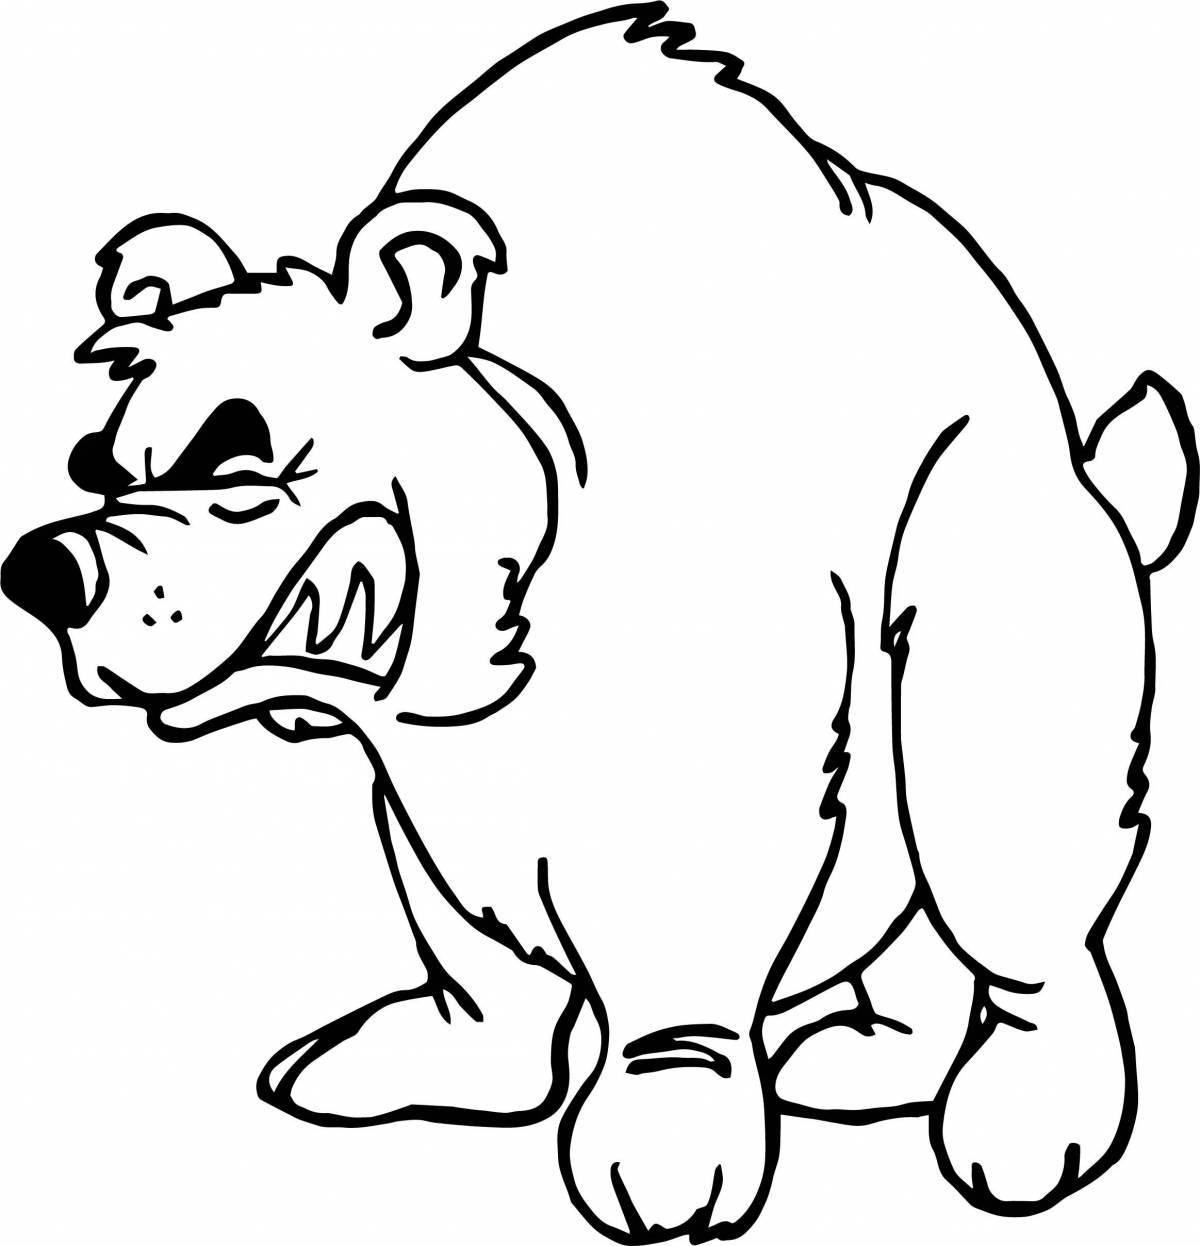 Stormy angry bear coloring page